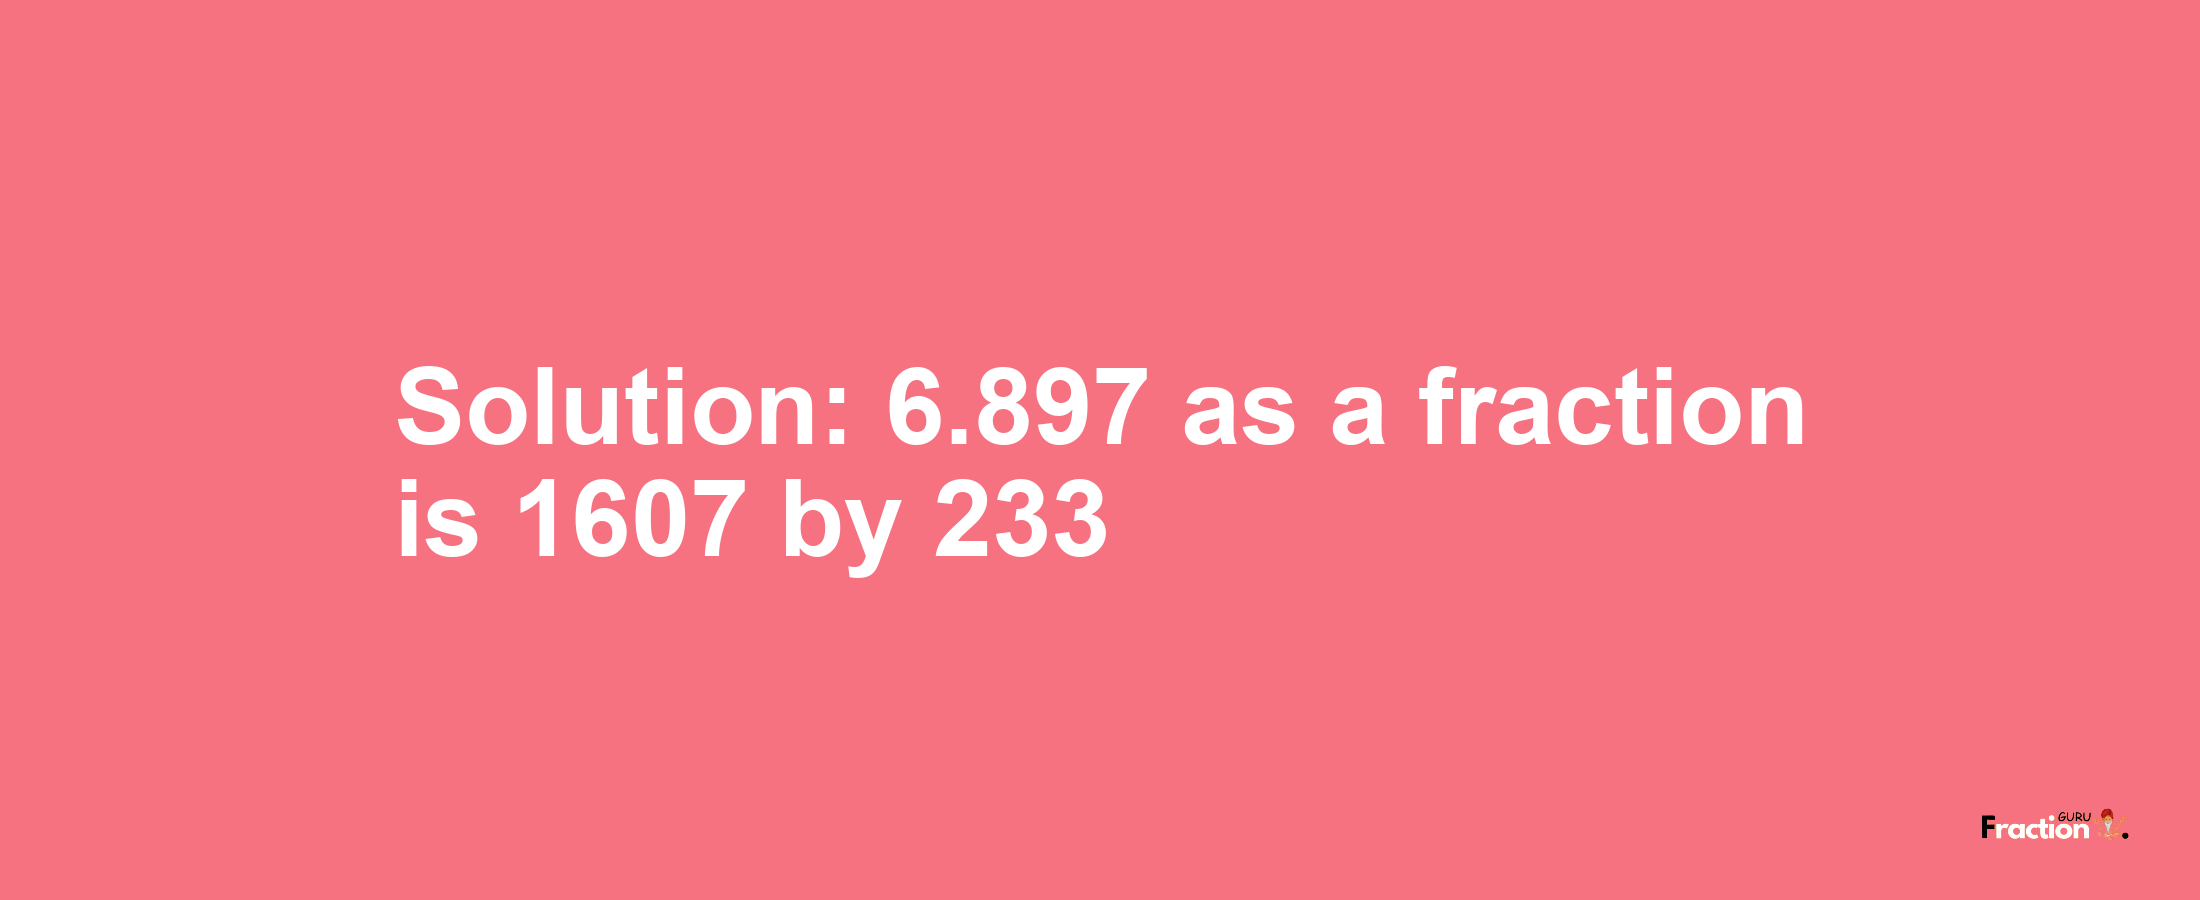 Solution:6.897 as a fraction is 1607/233